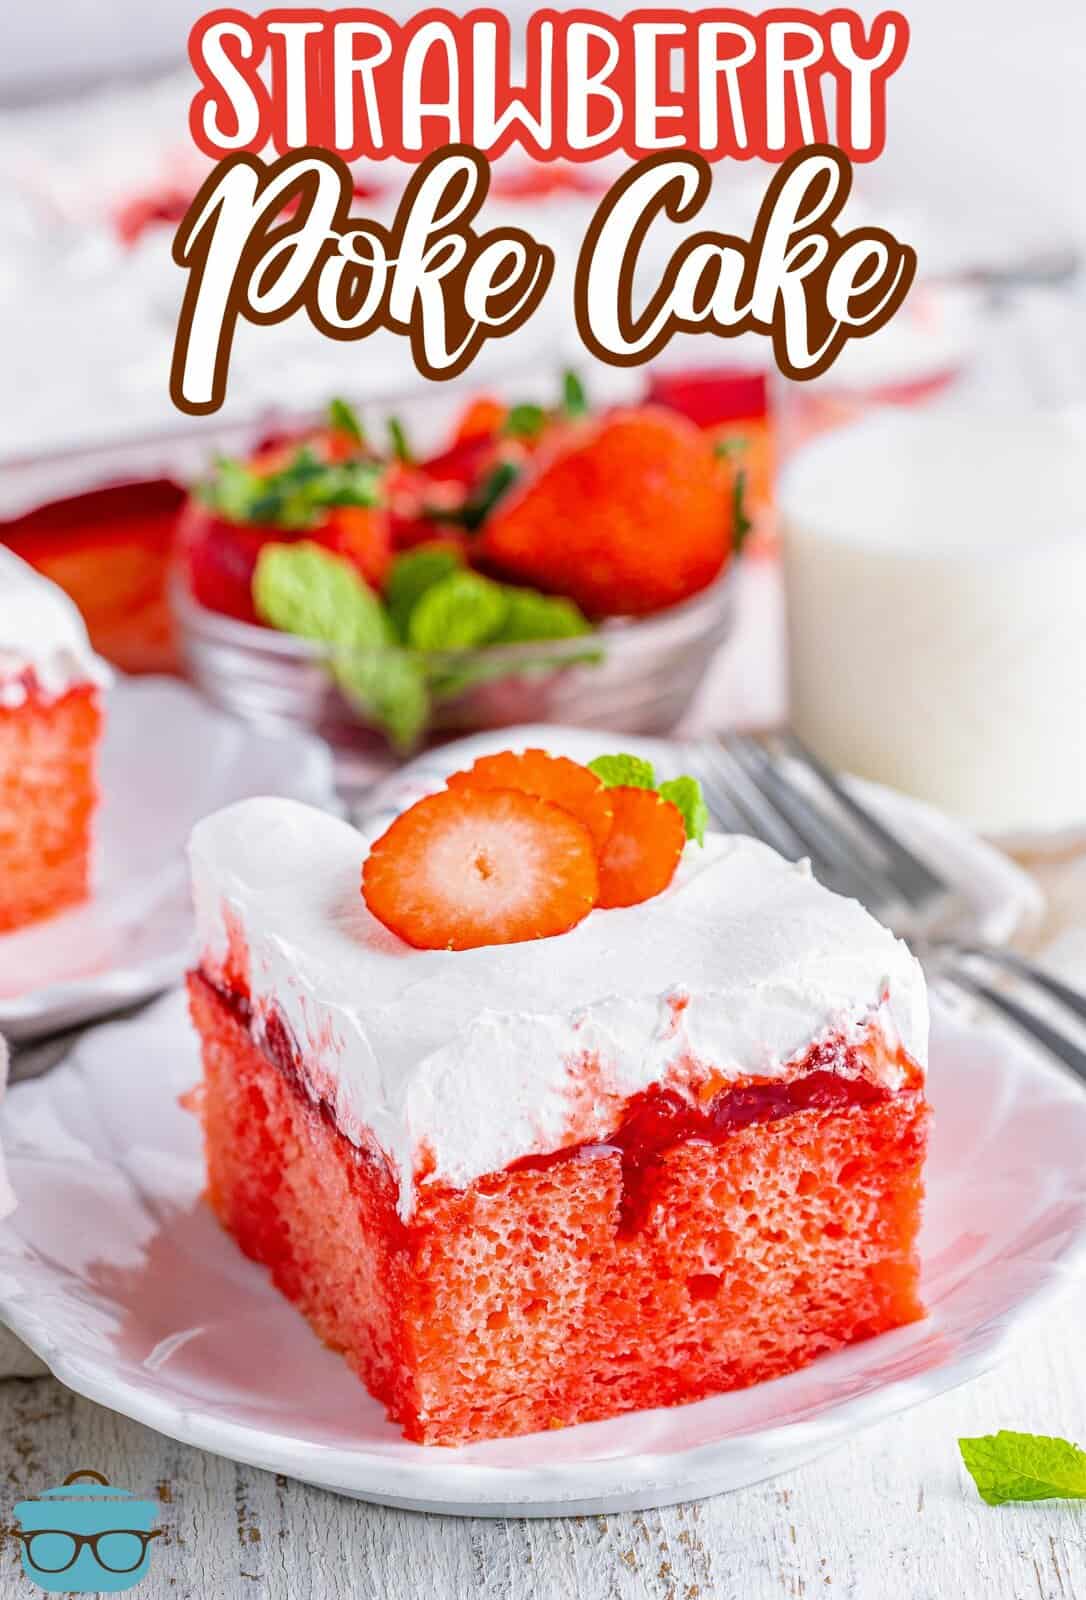 A slice of homemade strawberry poke cake sitting on a white plate.